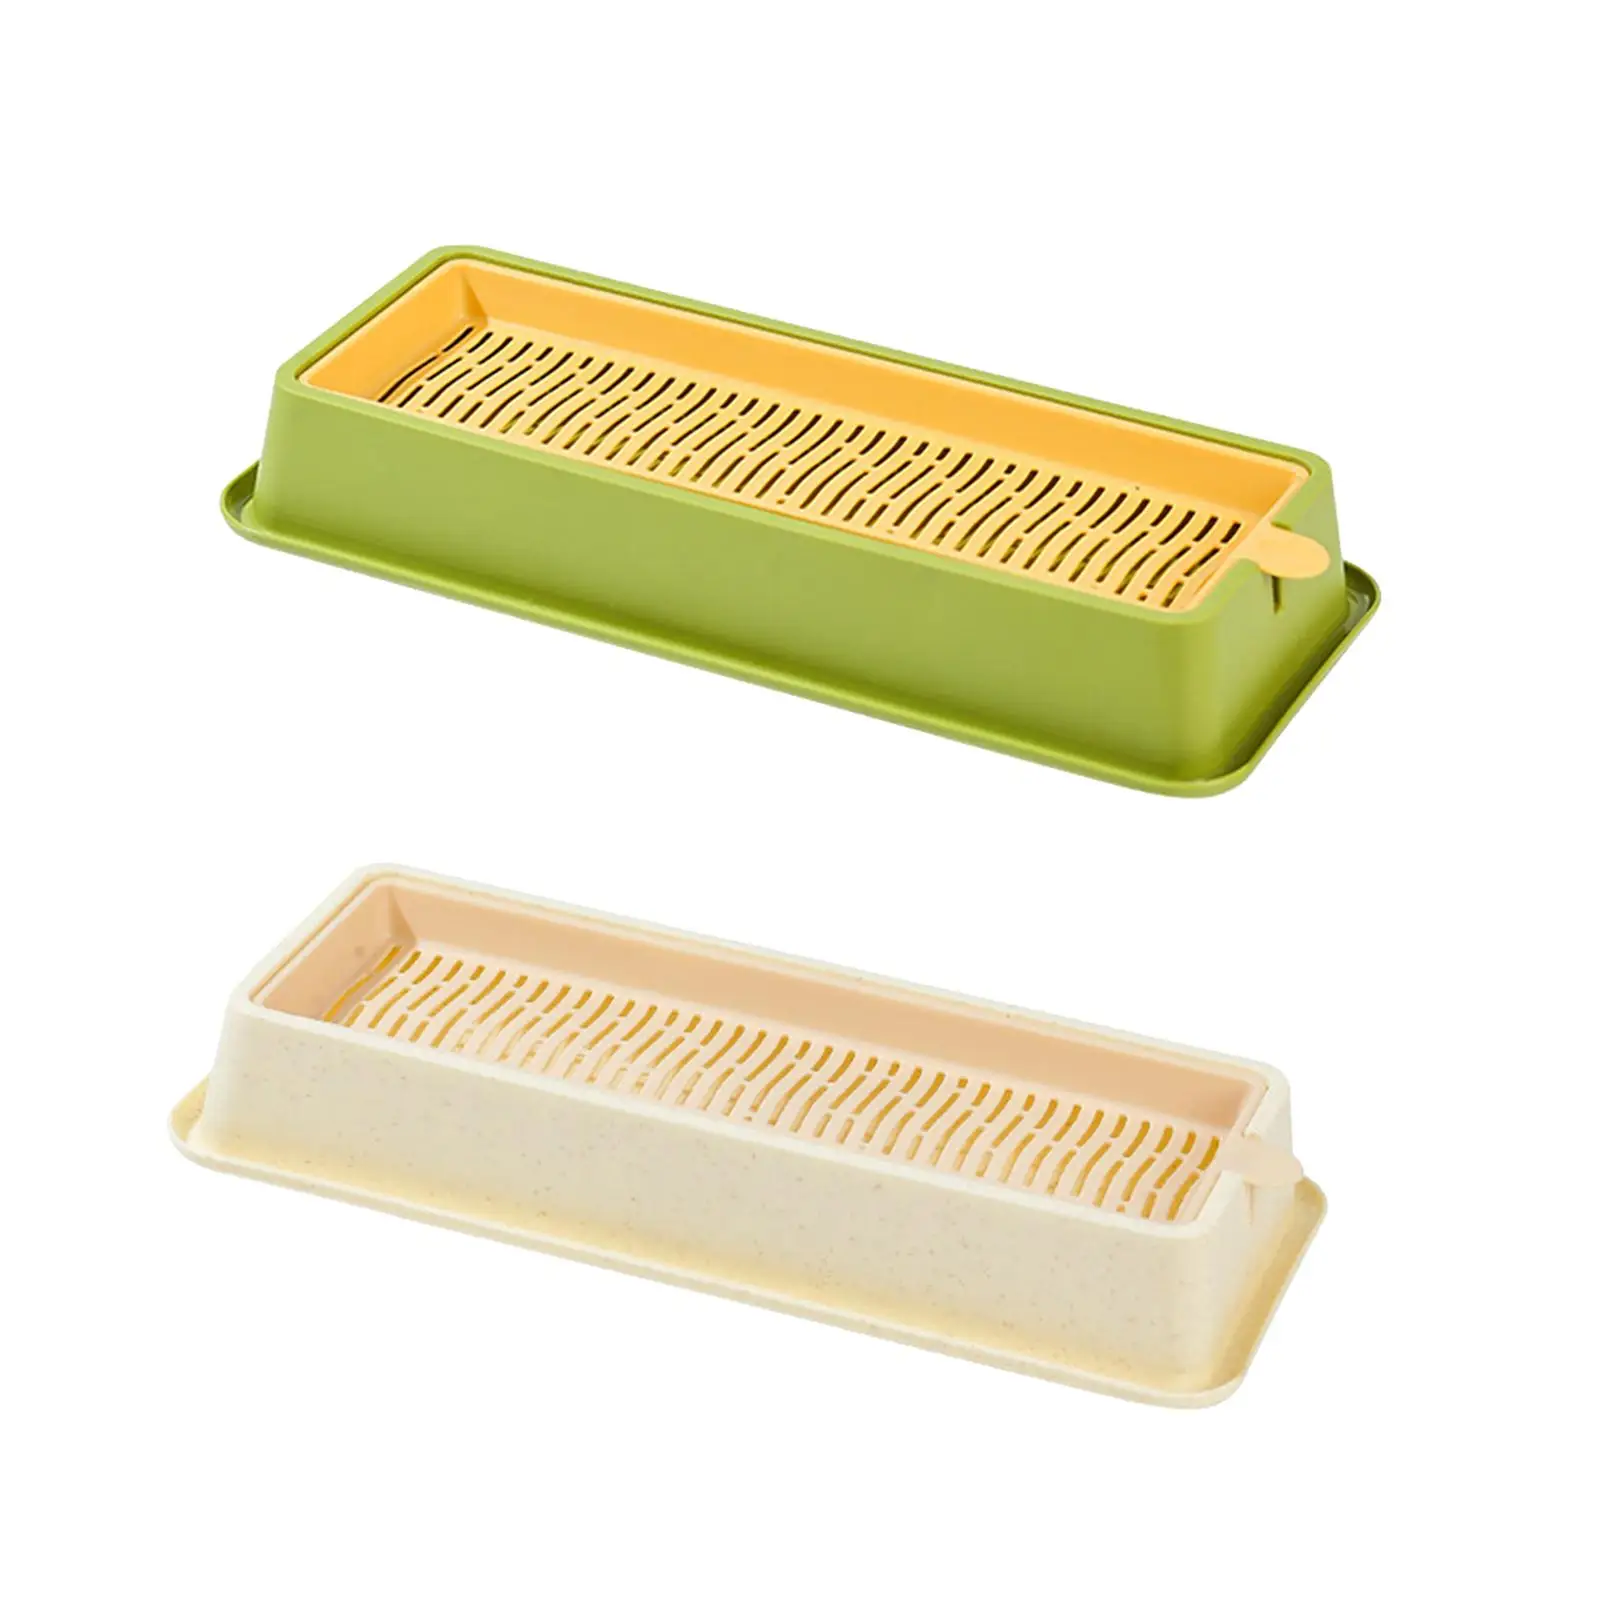 Seed Sprouter Tray Soil Free Box for Seedling Planting Home Garden